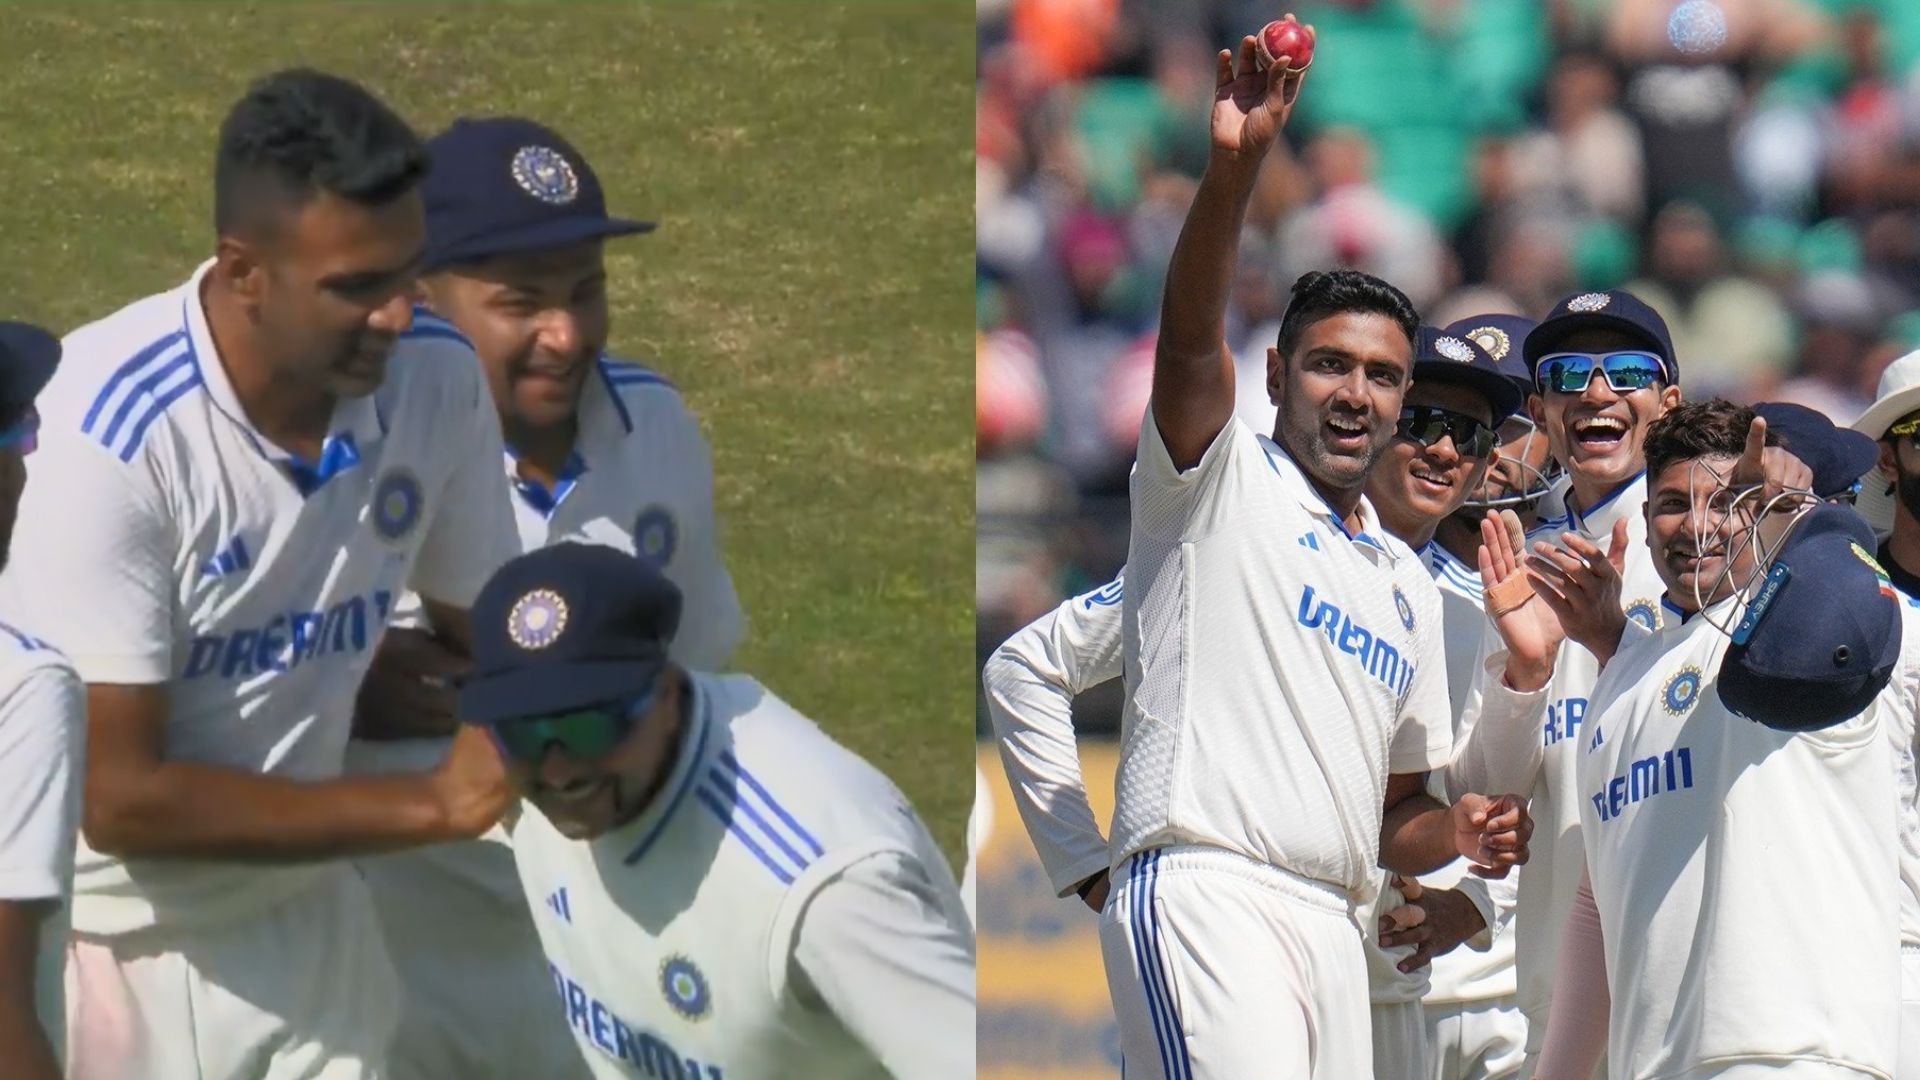 Snippets of some memorable moments from the fifth Test